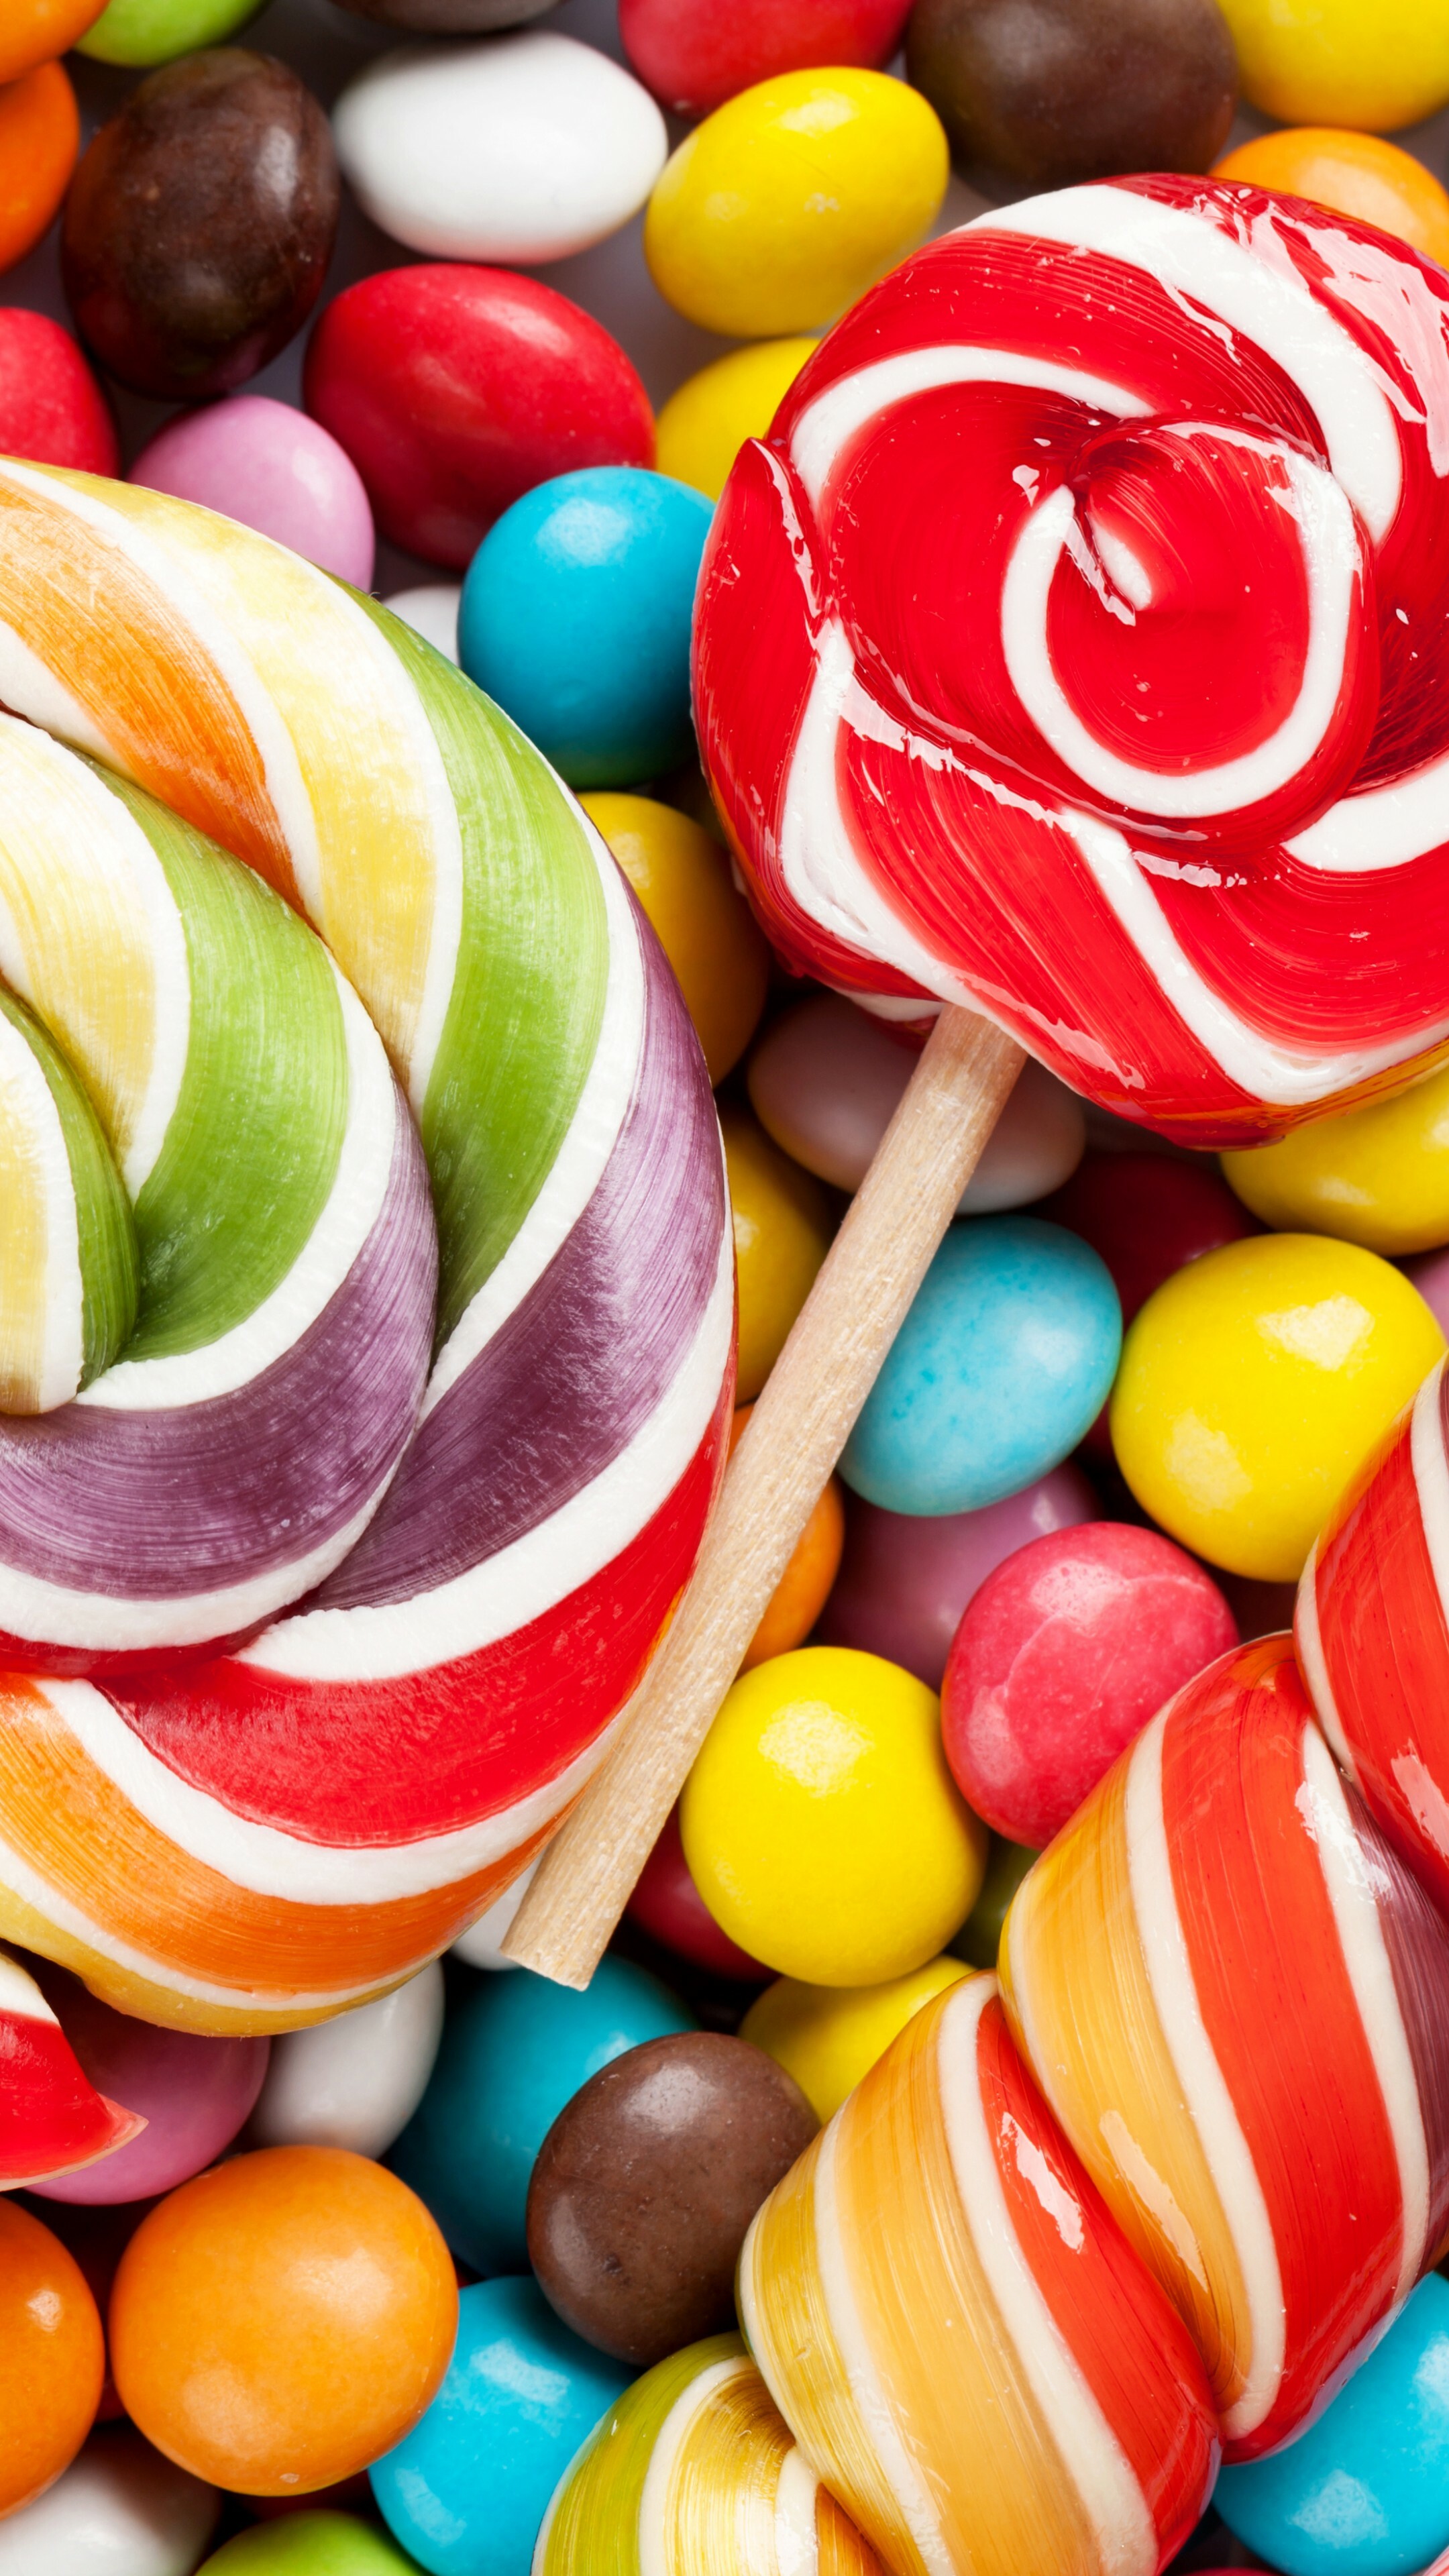 Sweets: Skittles, Multicolored fruit-flavored button-shaped candies, Lollipop. 2160x3840 4K Wallpaper.